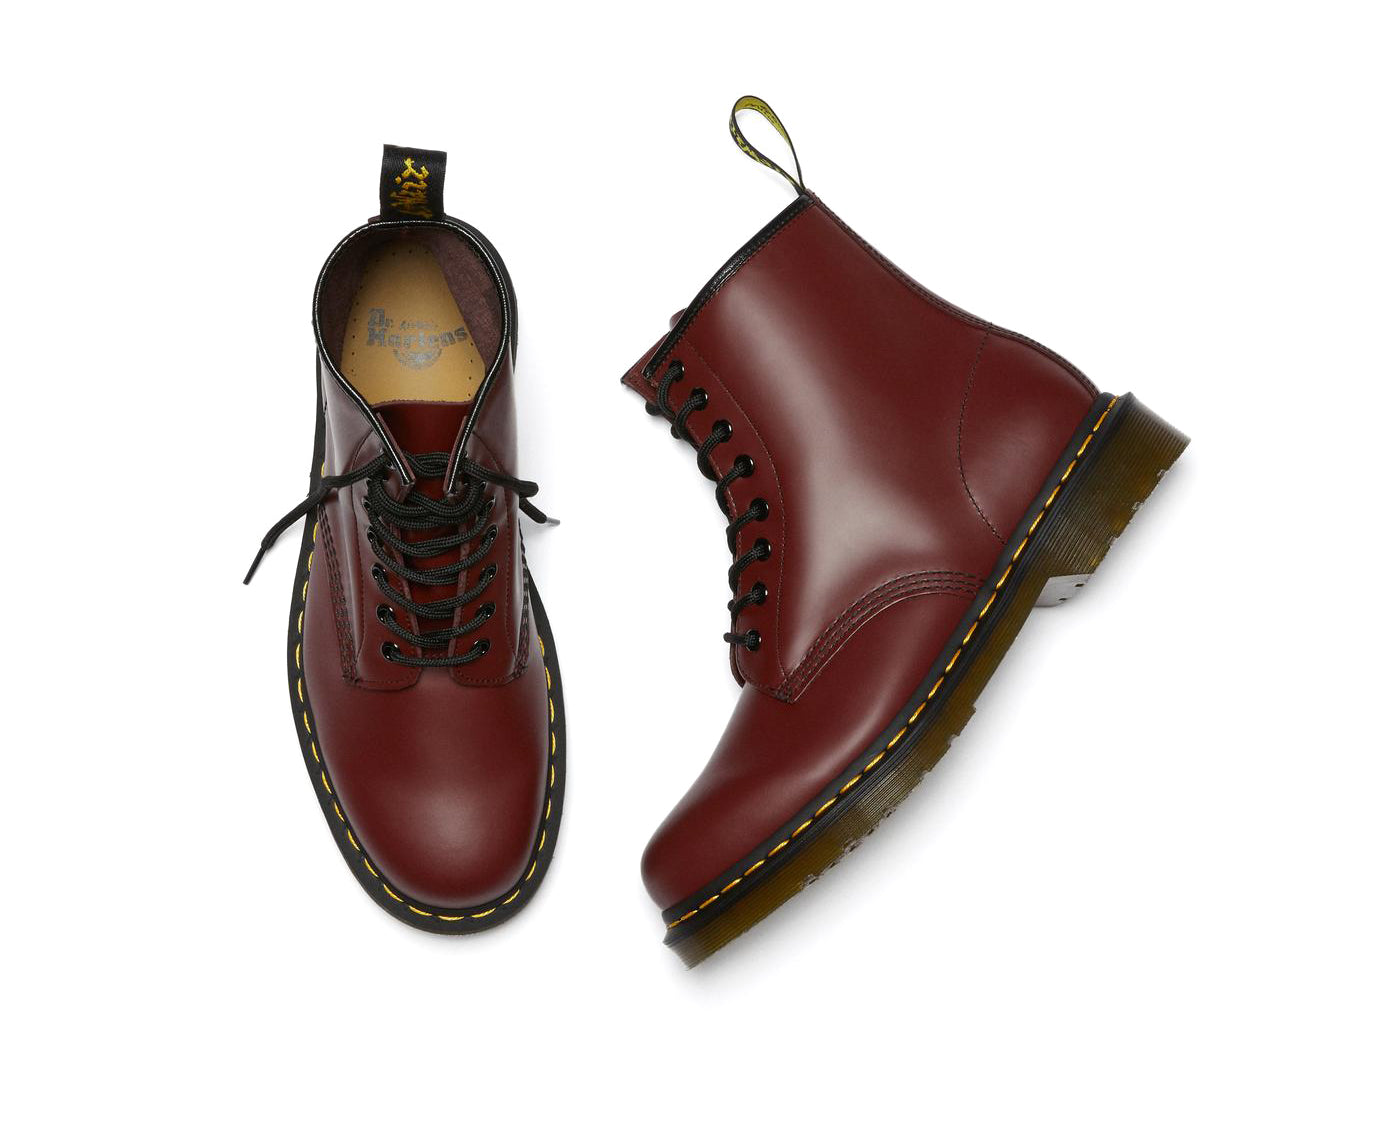 Cherry red ankle-height leather boot from Dr. Martens.